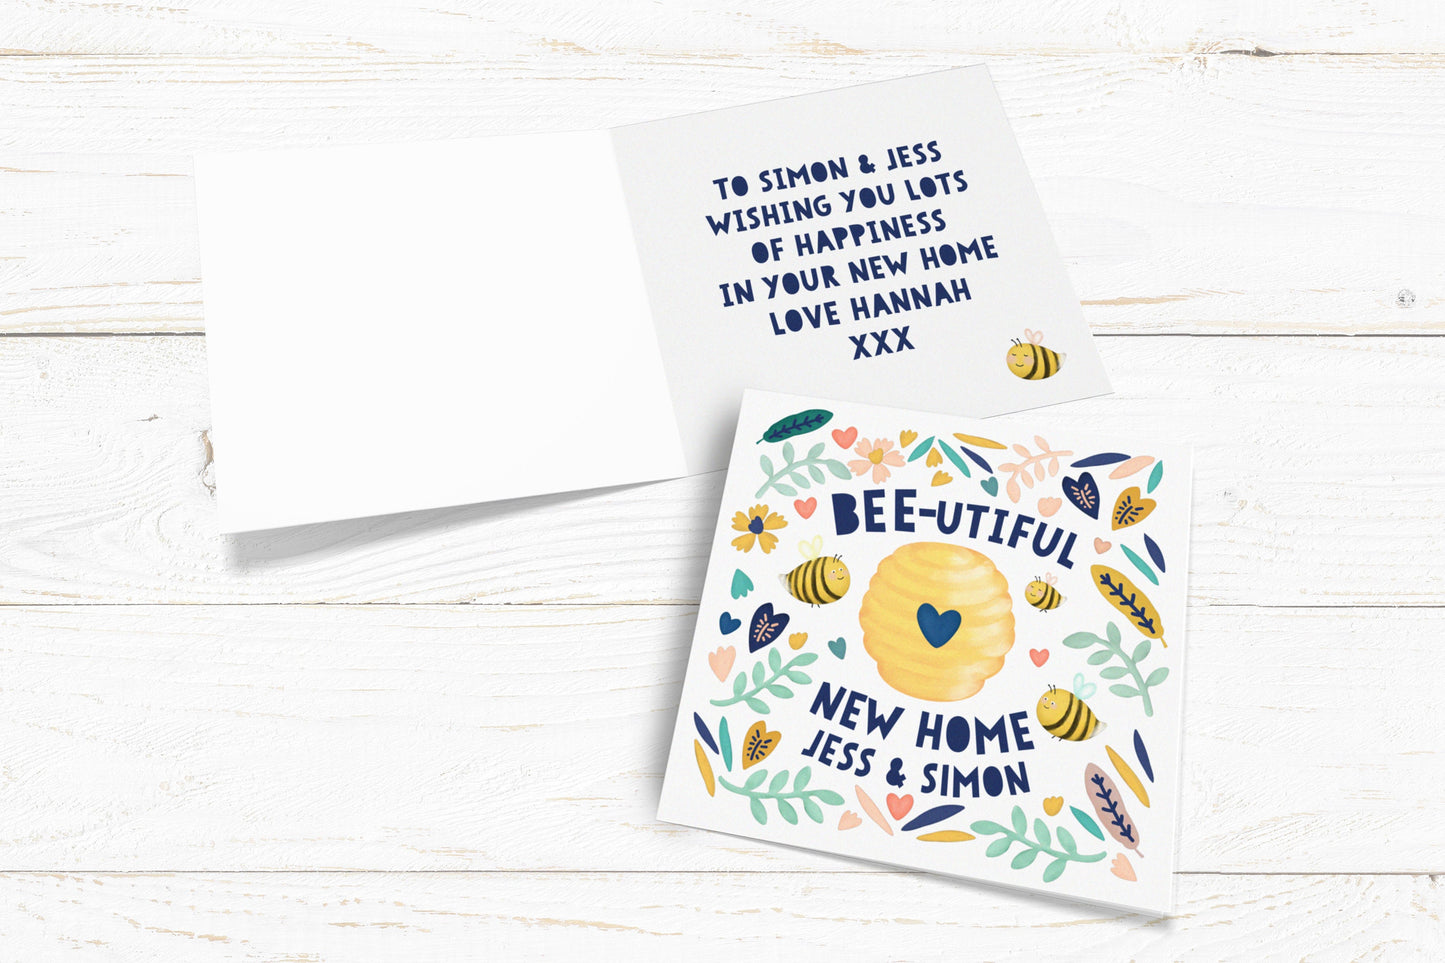 BEEutiful New home Card. Bee Card. New Home Card. Moving House Card. Cute Bee Cards. Send Direct Option.